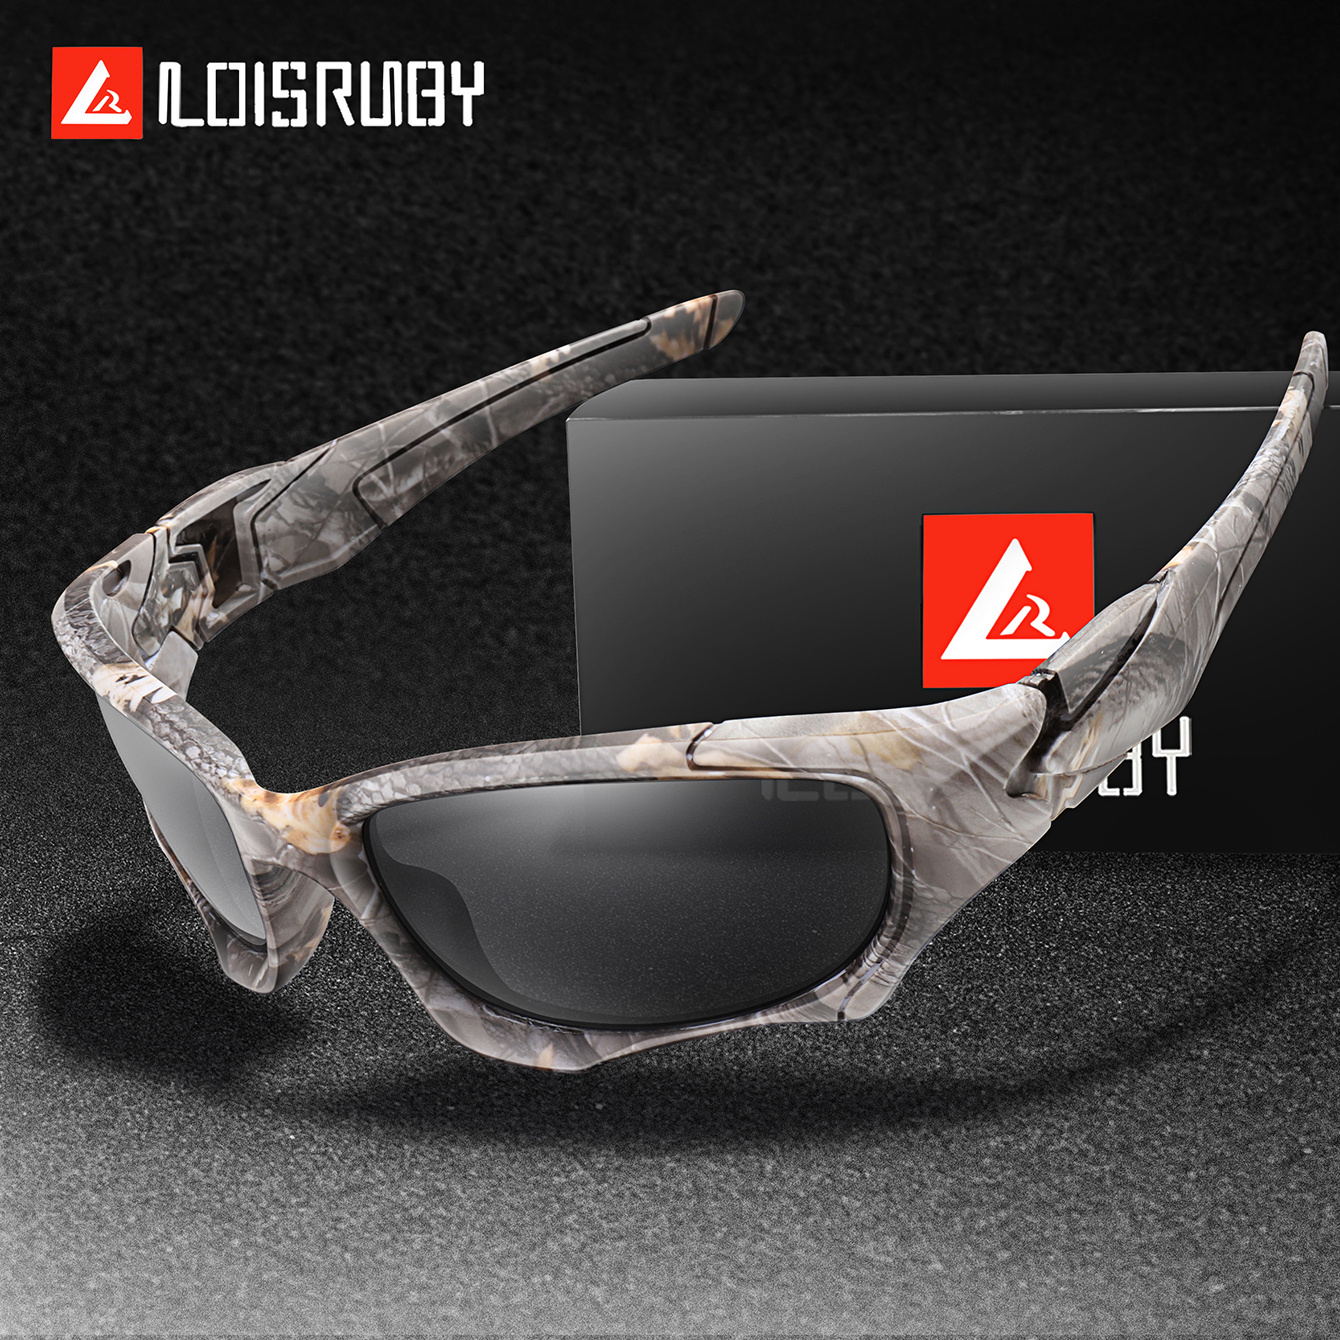 Premium Cool Camouflage Frame Wrap Around Polarized Sunglasses For Men  Women Outdoor Sports Driving Fishing Cycling Supply Photo Prop, Shop Now  For Limited-time Deals